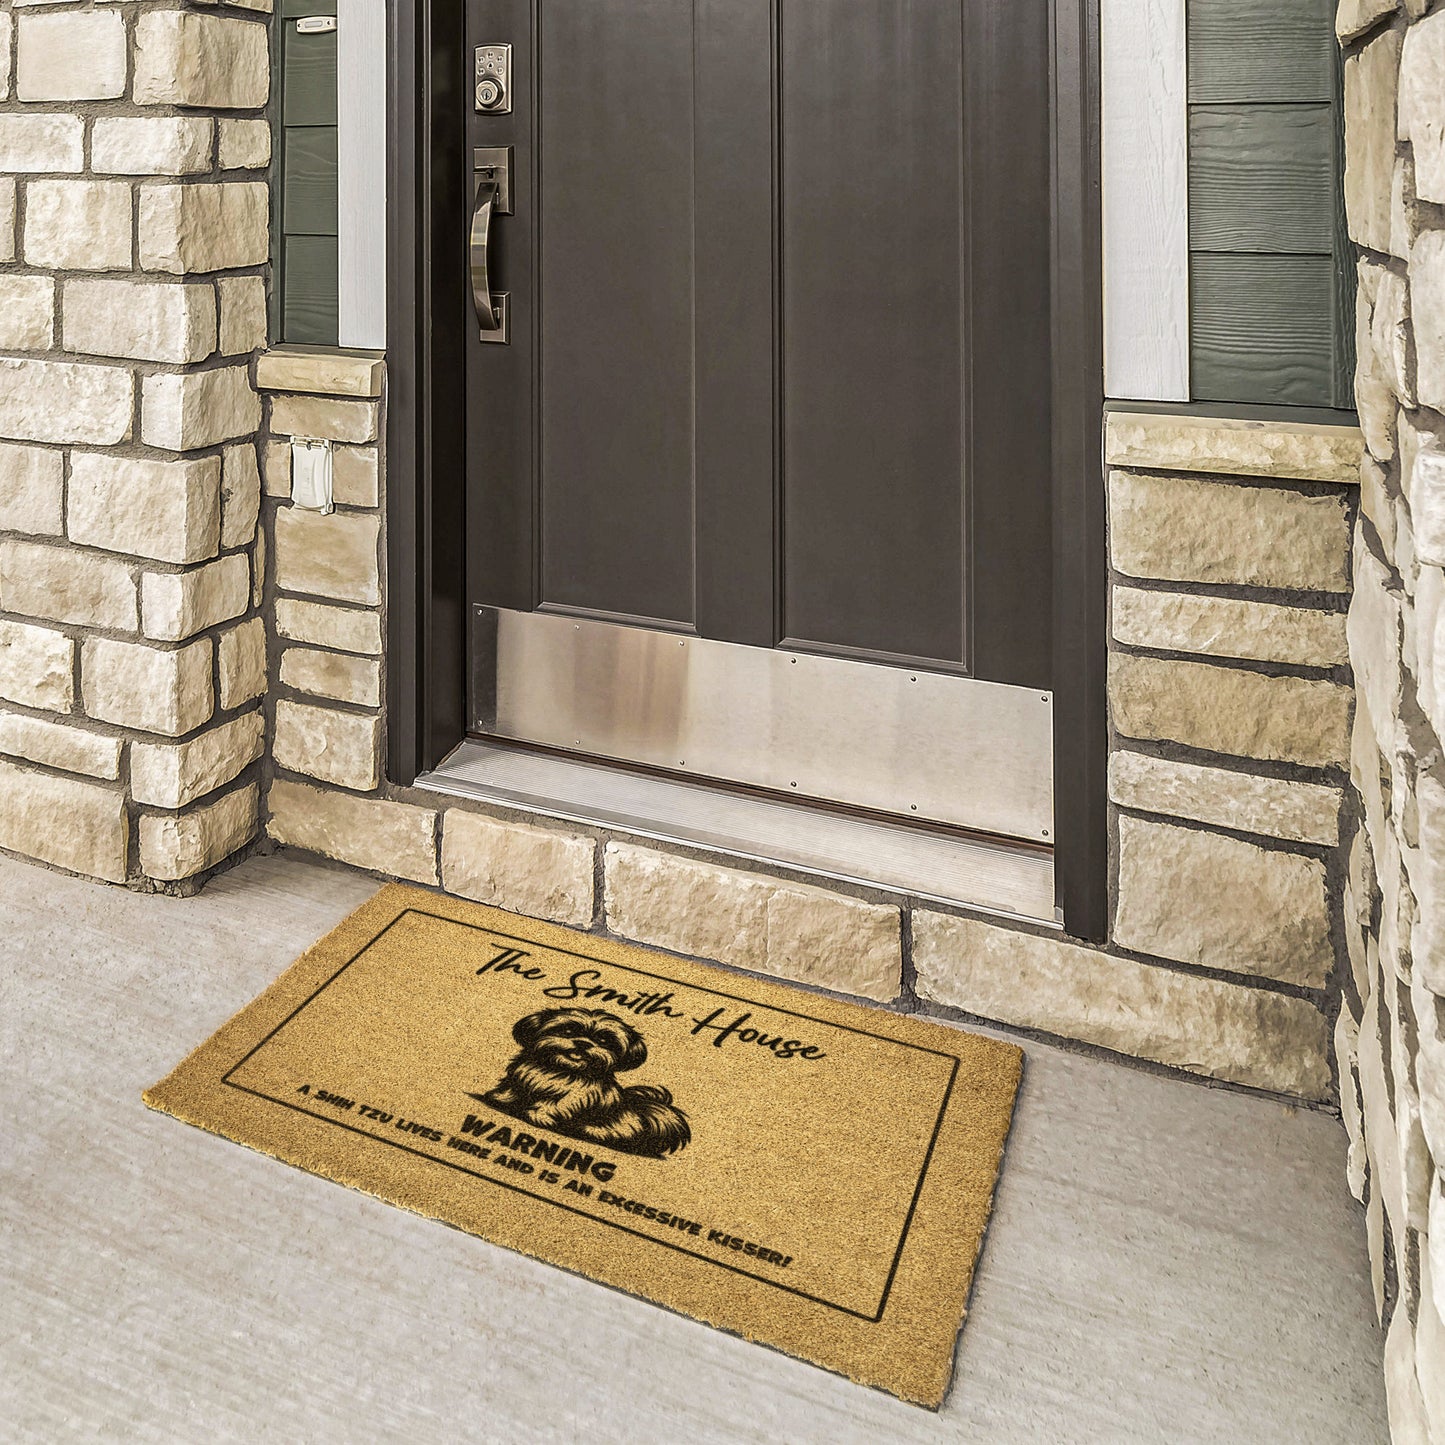 Custom Welcome Doormat - Let visitors knwo what is about to greet them - A Shih Tzu lives here and is an excessive kisser